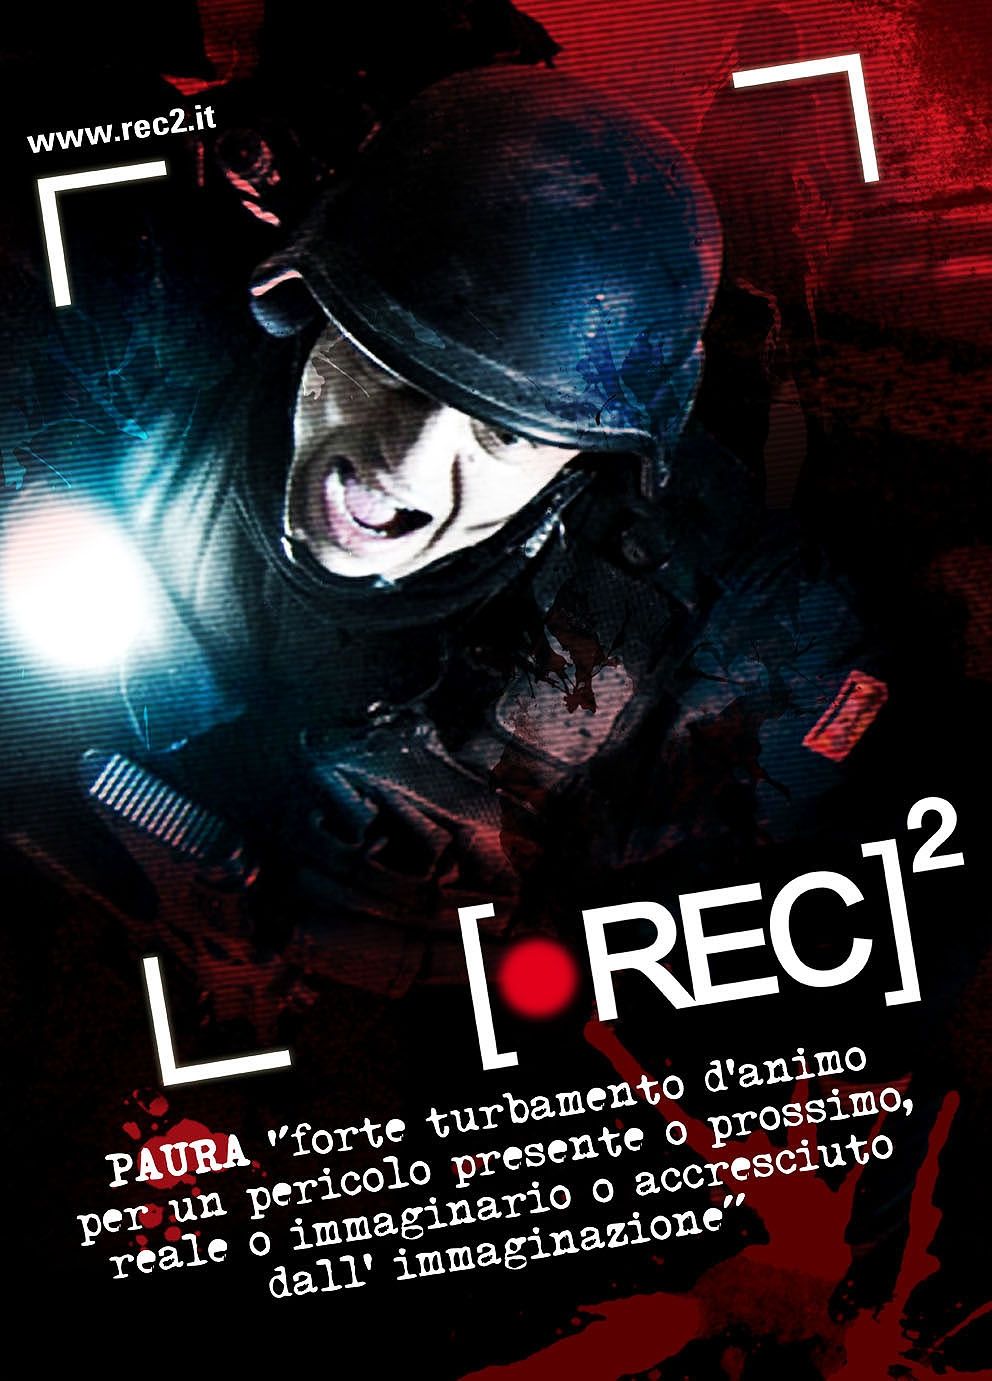 Extra Large Movie Poster Image for [Rec] 2 (#6 of 7)